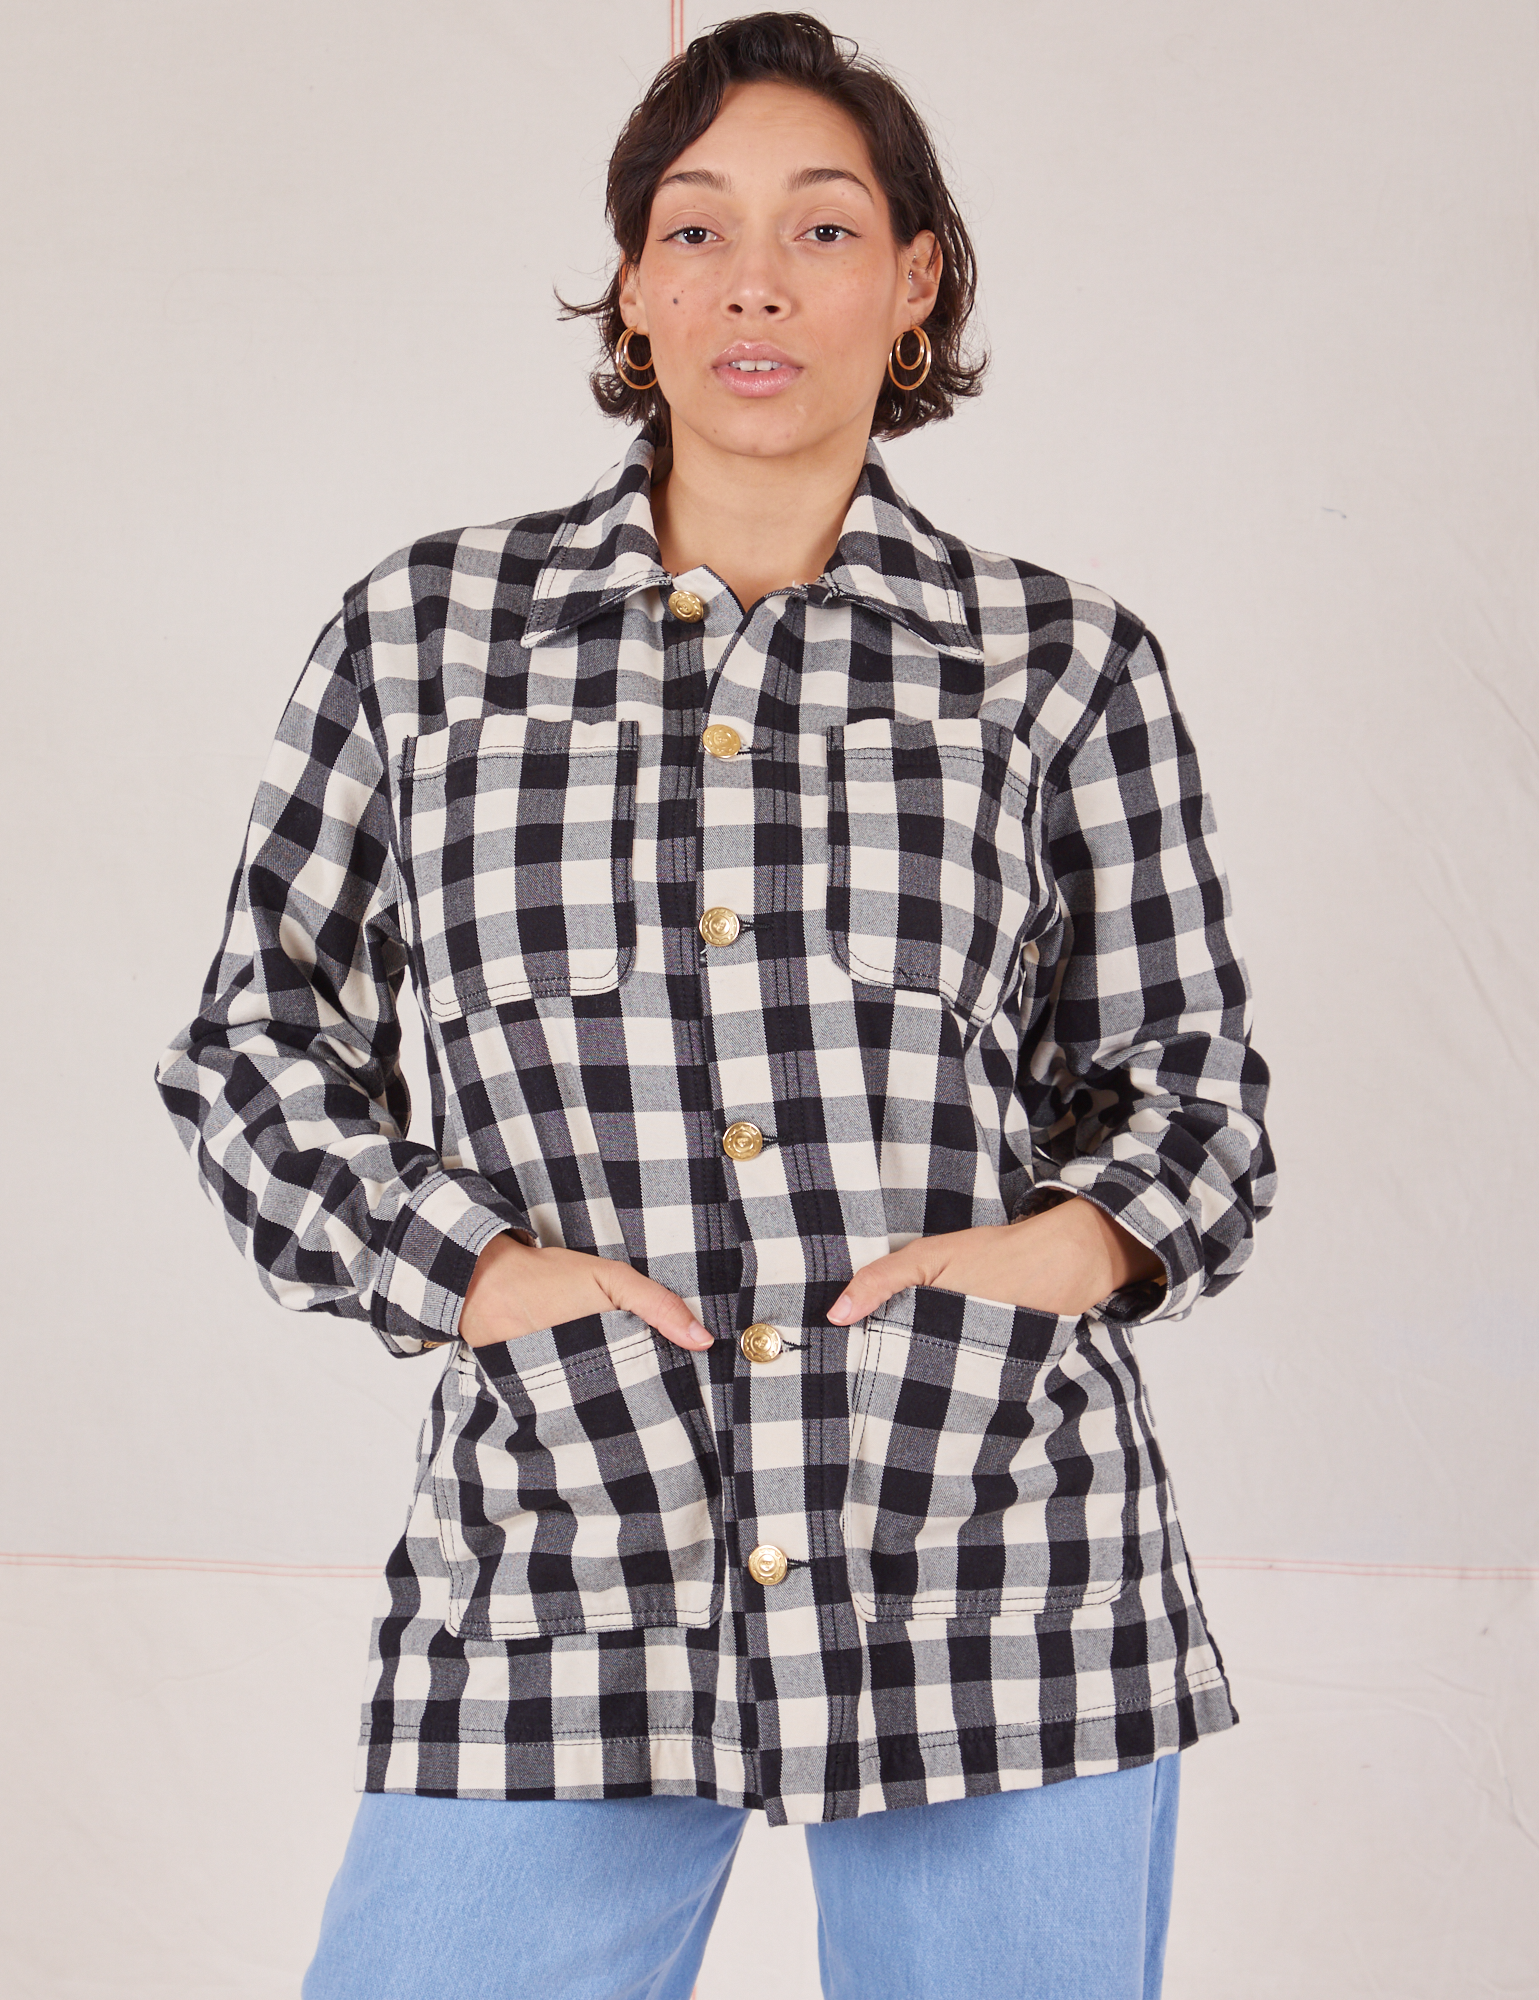 Tiara is wearing a buttoned up Big Gingham Field Coat and has her hands in the front pockets